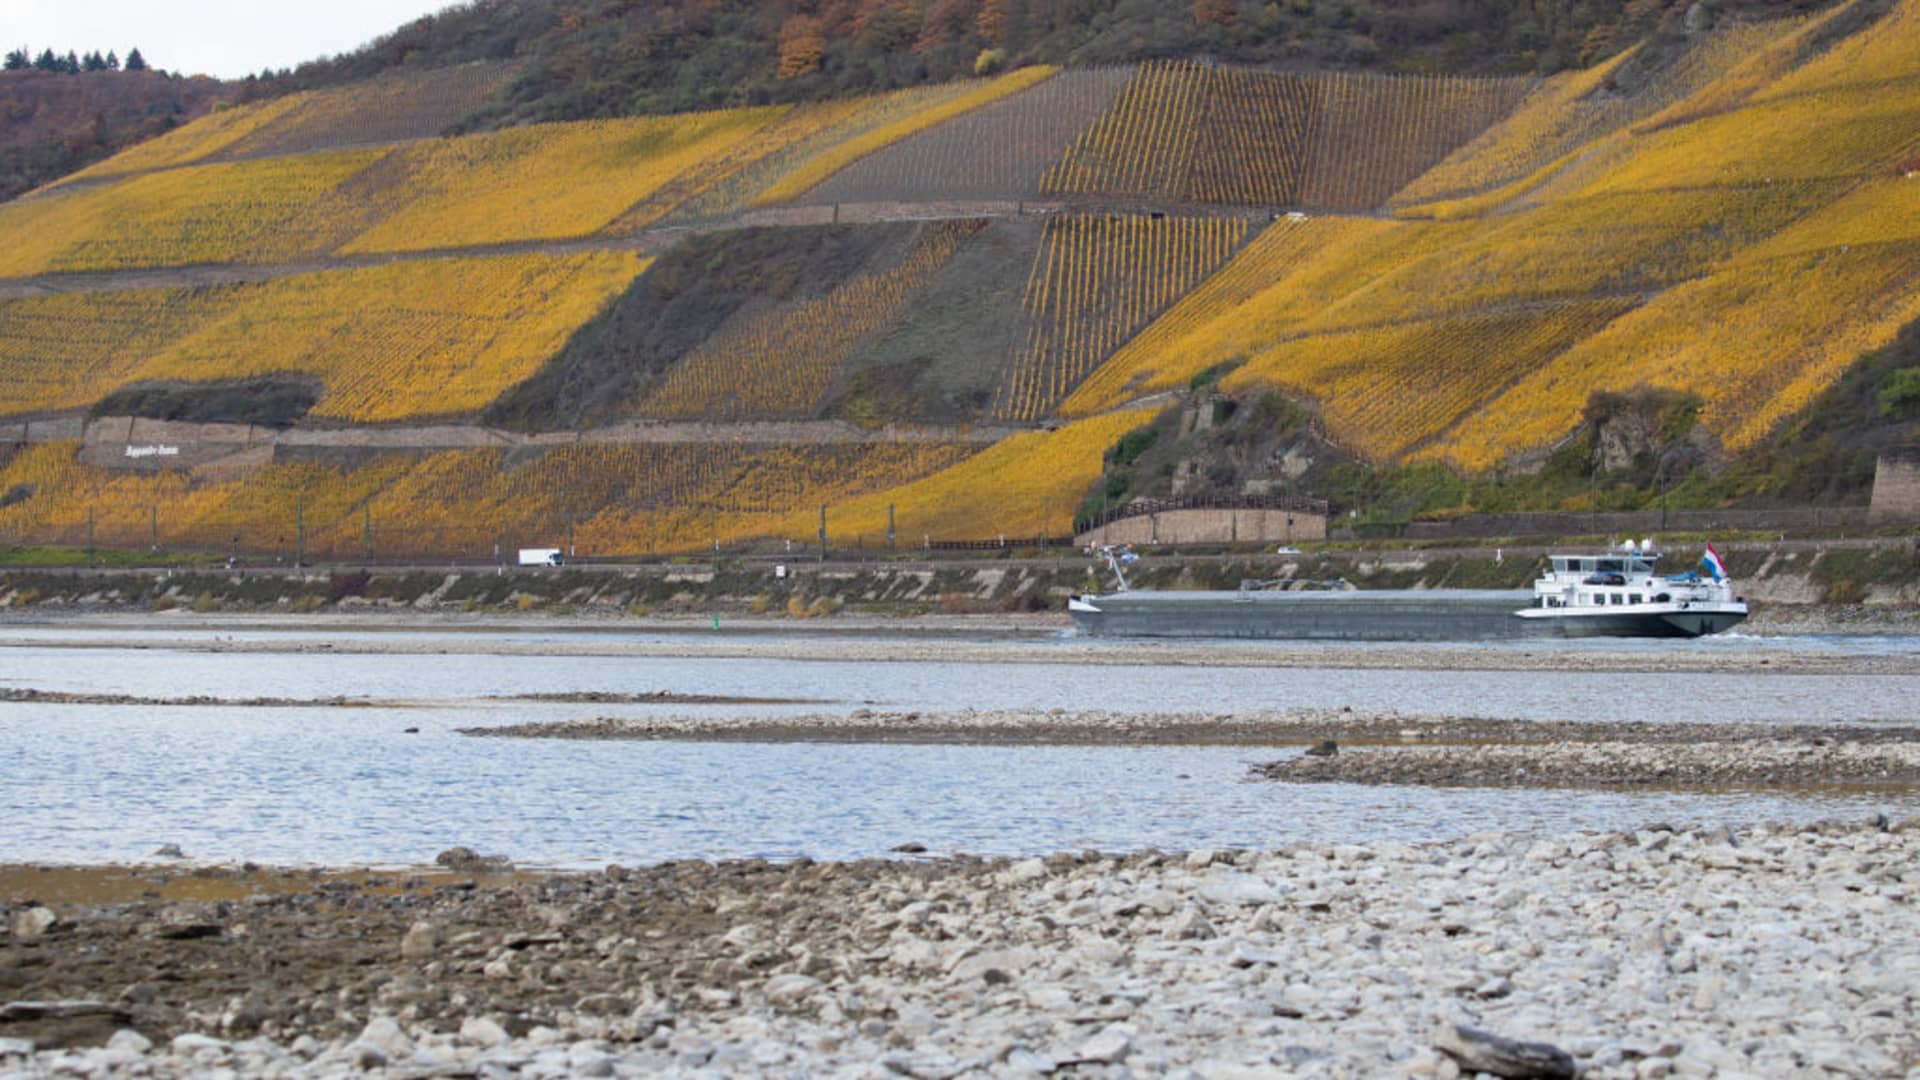 Half loaded cargo ships pass by the low water in the River Rhine along the vineyards on November 13, 2018 in Osterspai near Sankt Goarshausen, Germany. Summer heat wave in Germany as well unfavorable wind conditions, and no rain left the Rhine - which begins in the Swiss Alps, runs through Germany, and empties into the North Sea - at record low water levels.